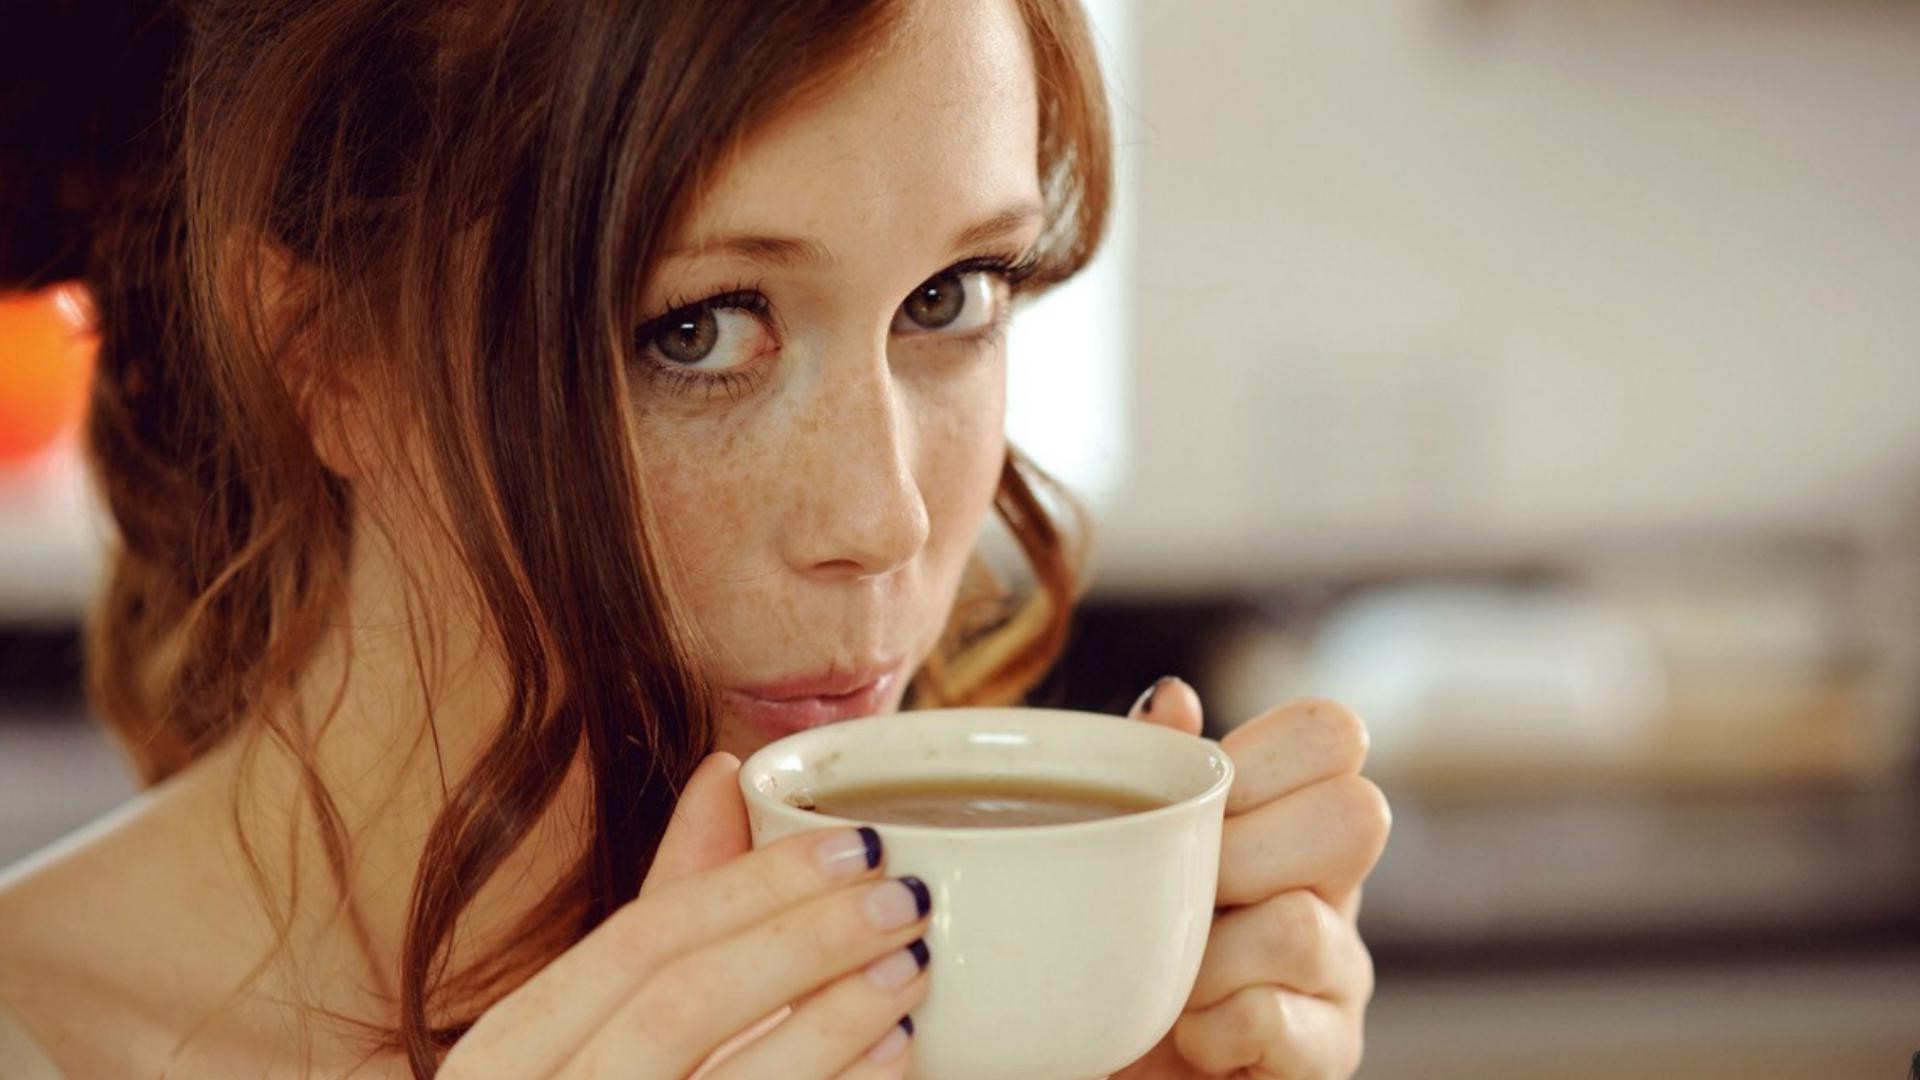 women, Model, Redhead, Long Hair, Looking At Viewer, Face, Portrait, Charlotte Herbert, Chad Suicide, Depth Of Field, Blue Eyes, Cup, Coffee, Drink, Freckles, Blow Wallpaper